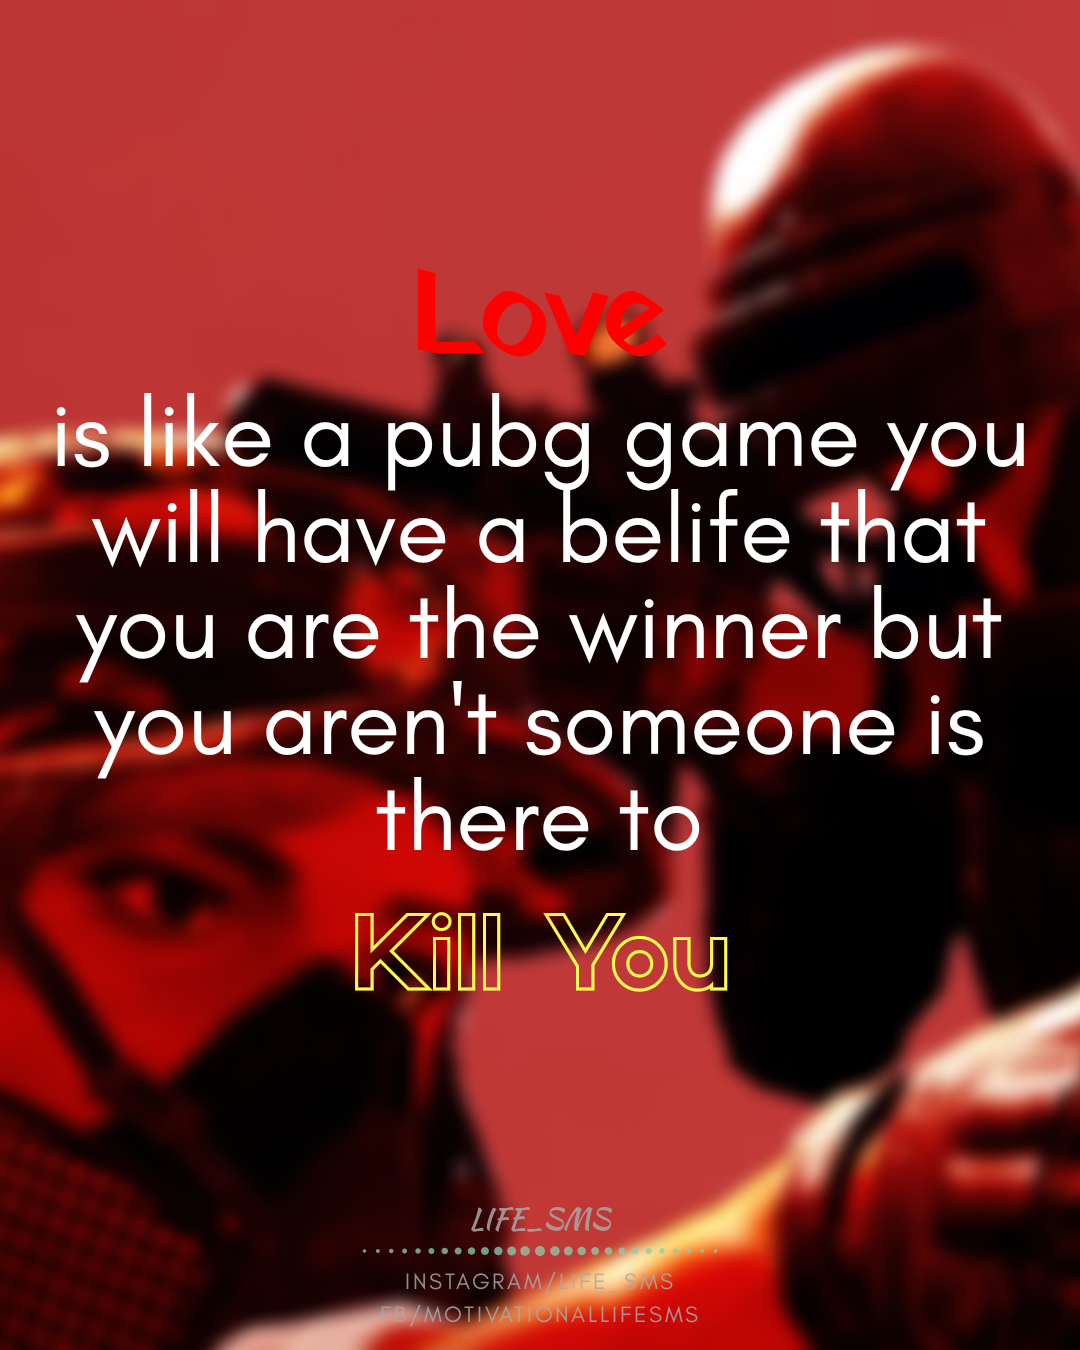 Love is like a pubg game